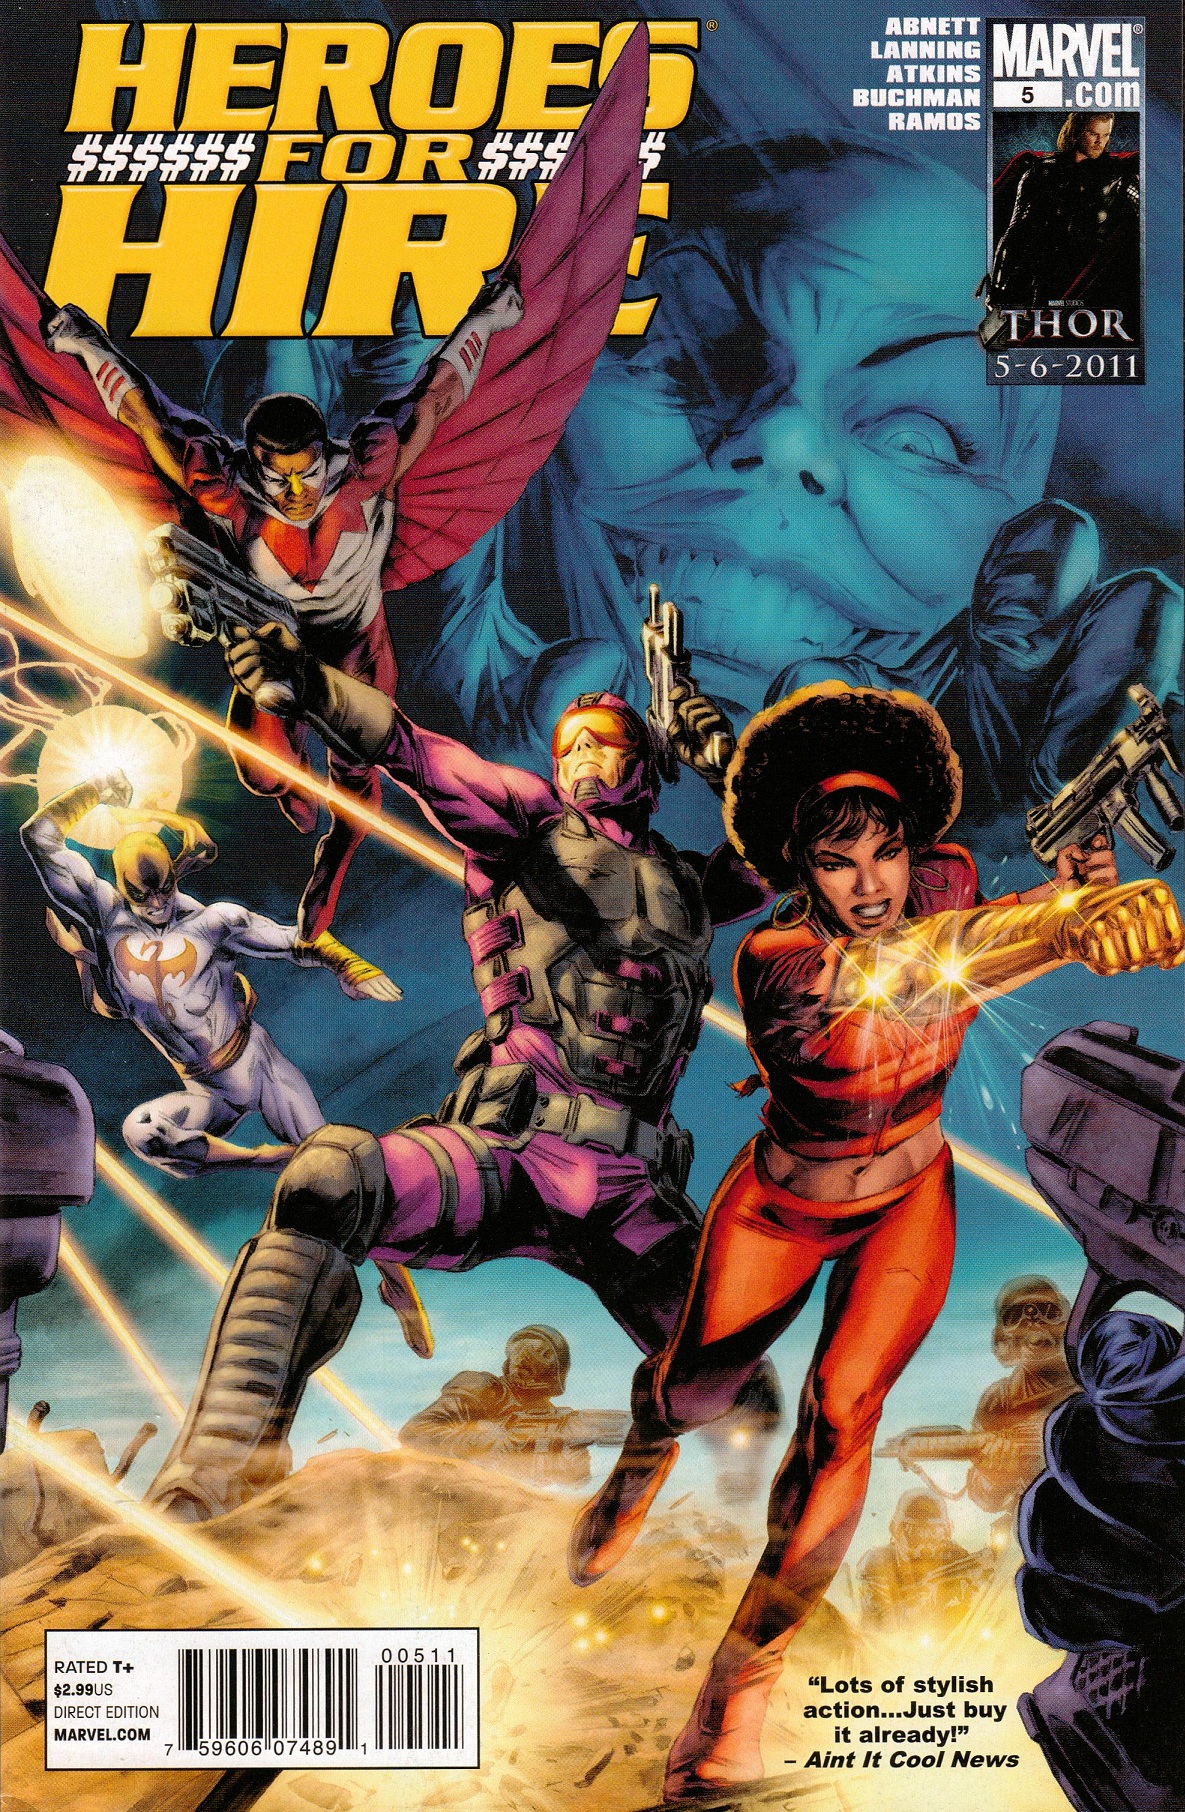 Heroes For Hire #24